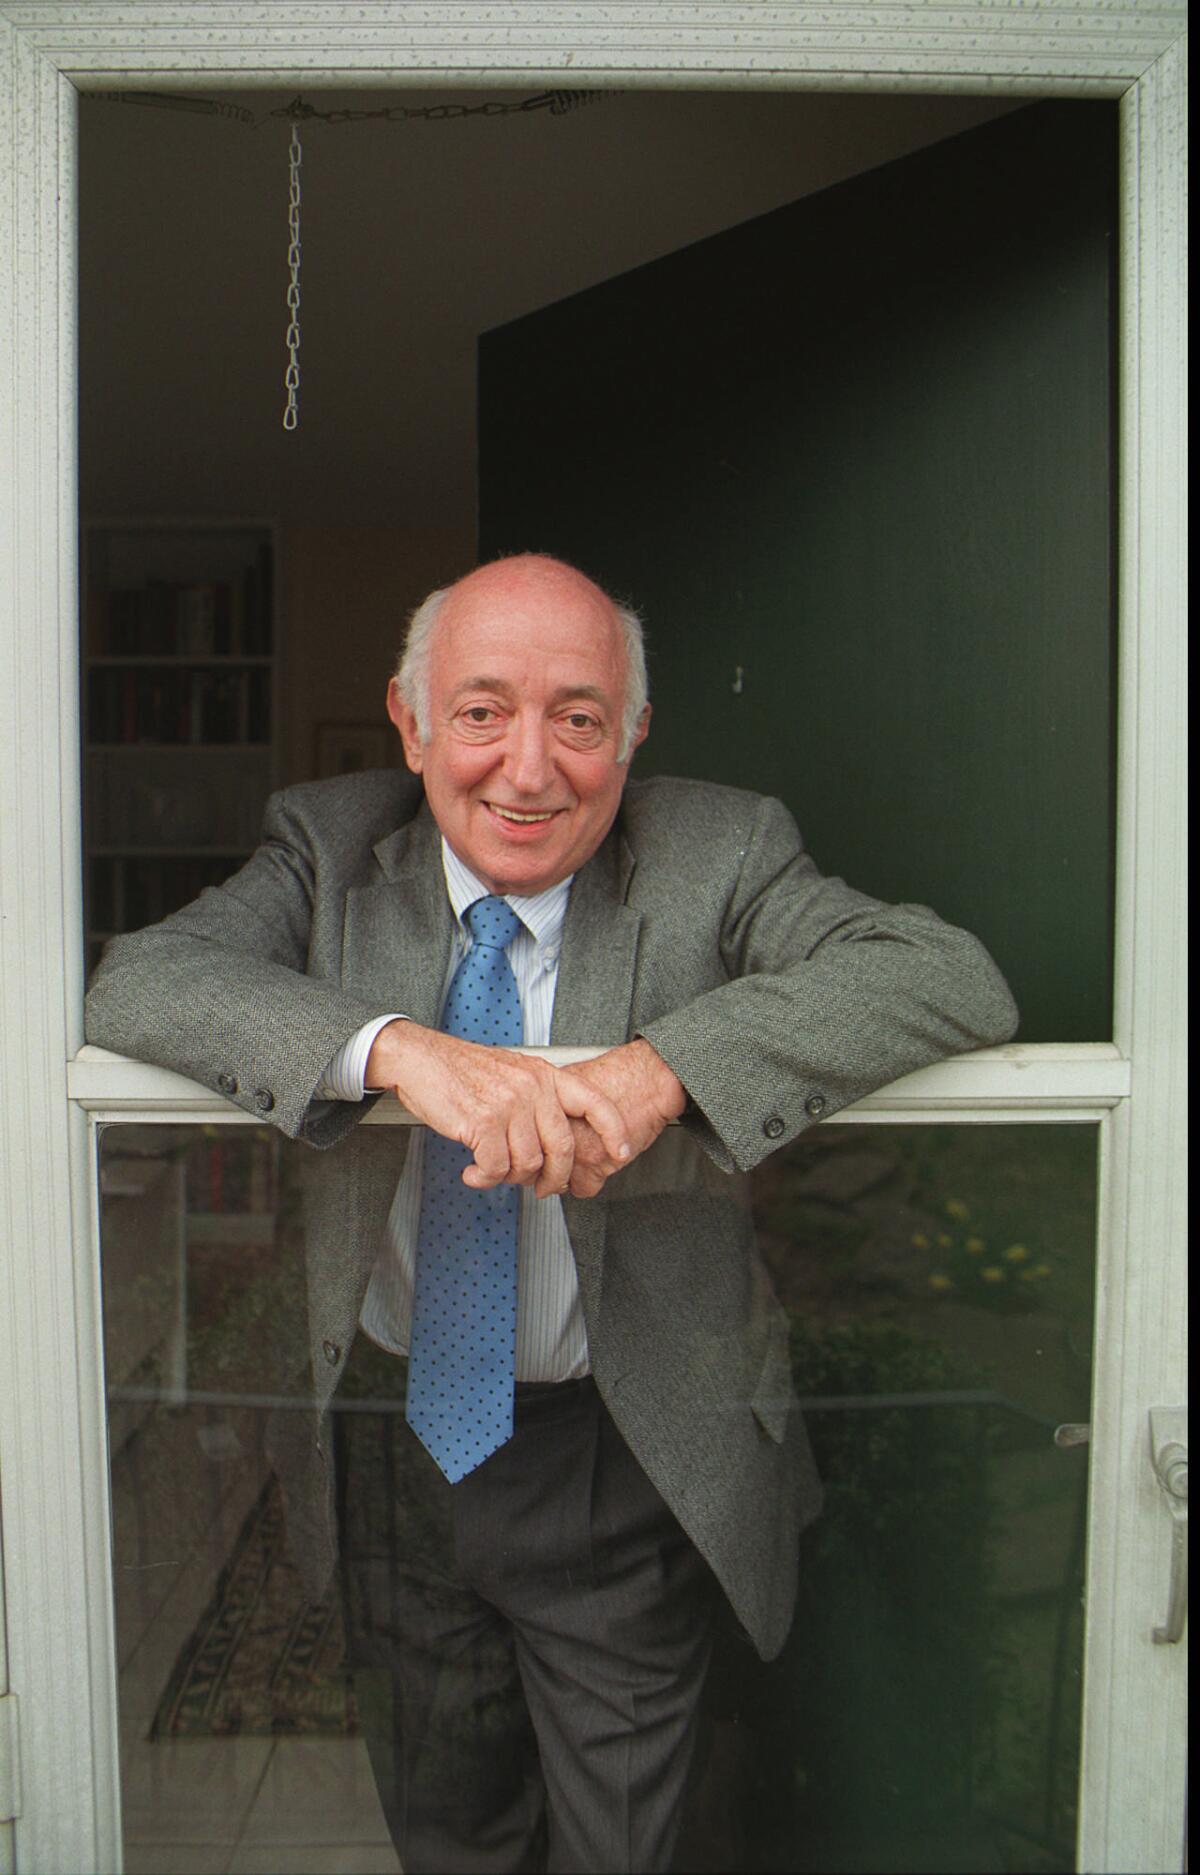 Author Roger Kahn at his house in CorononHudson, N.Y., in 1997.